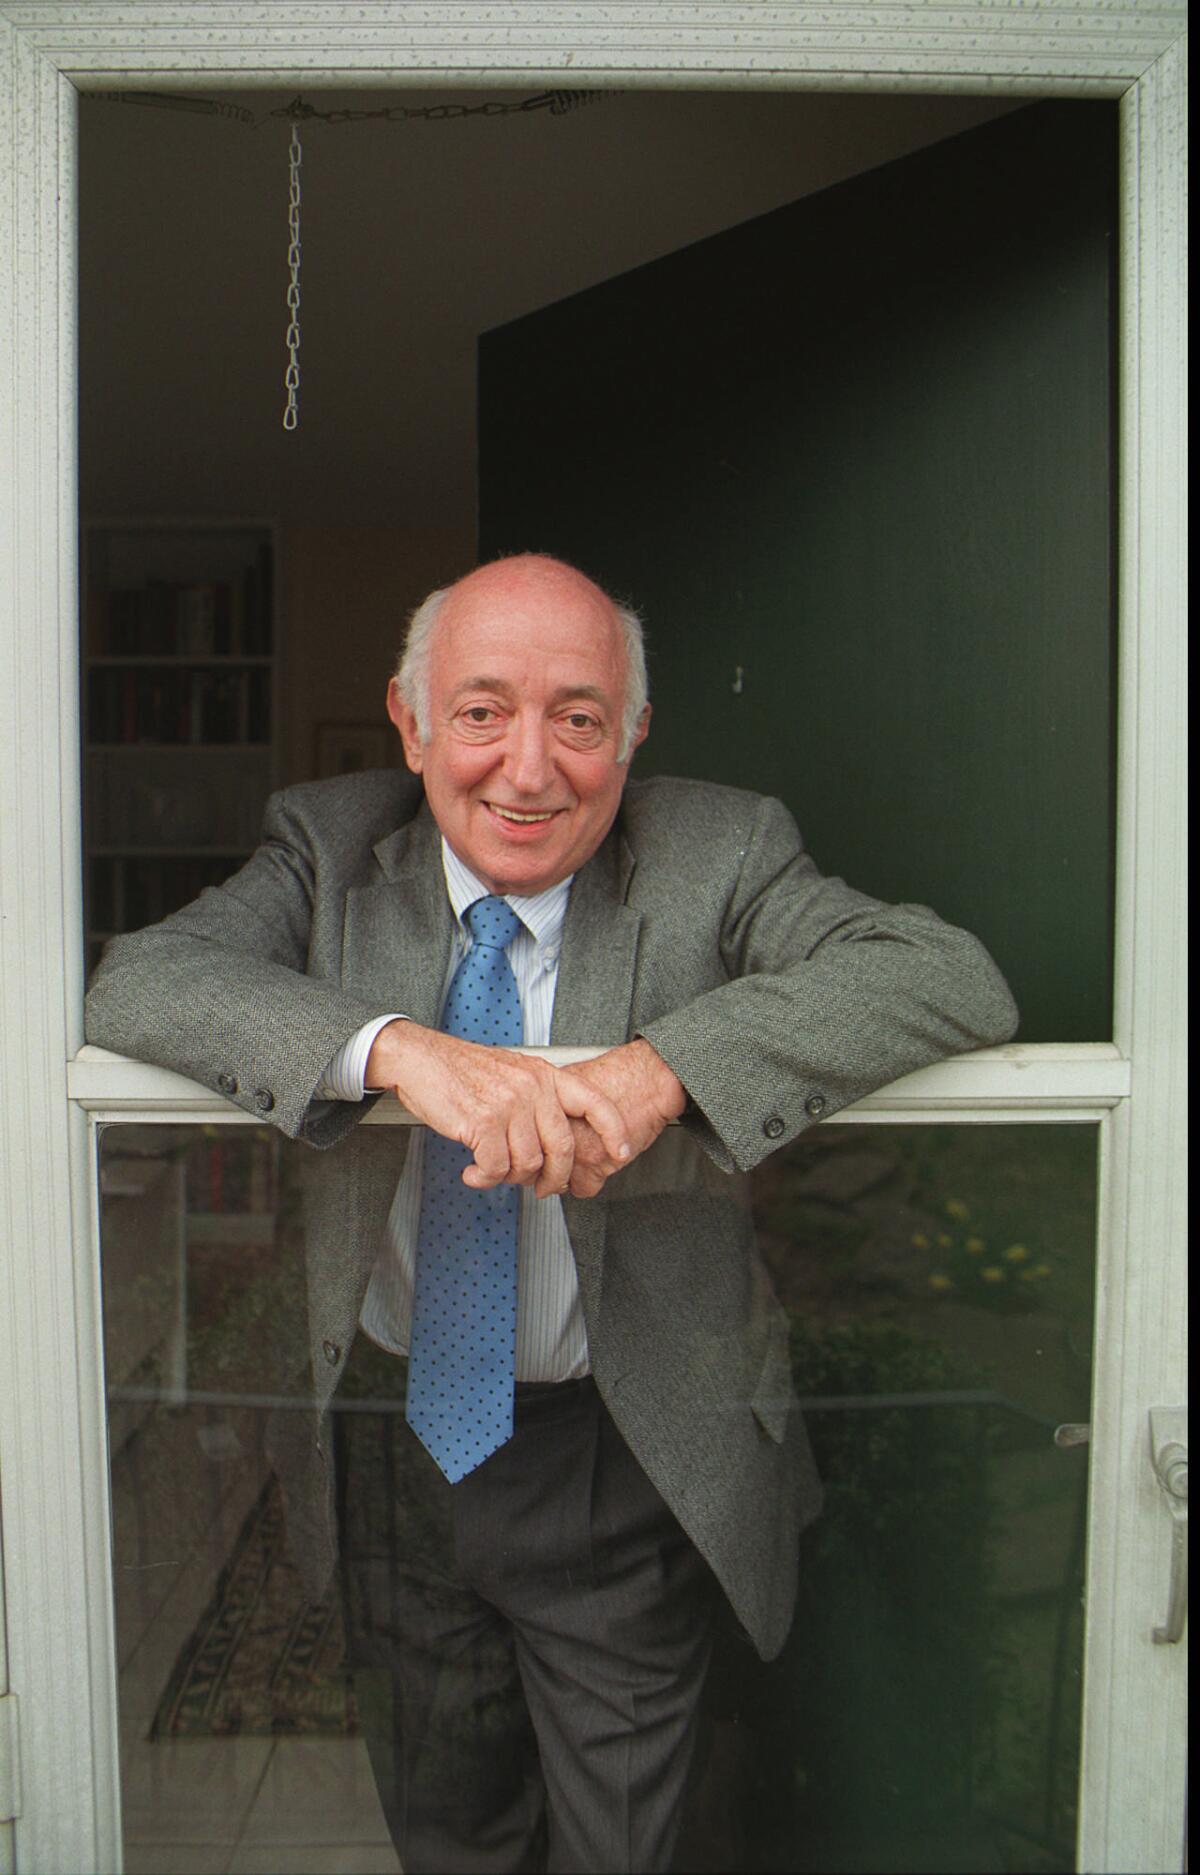 Author Roger Kahn at his house in CorononHudson, N.Y., in 1997.